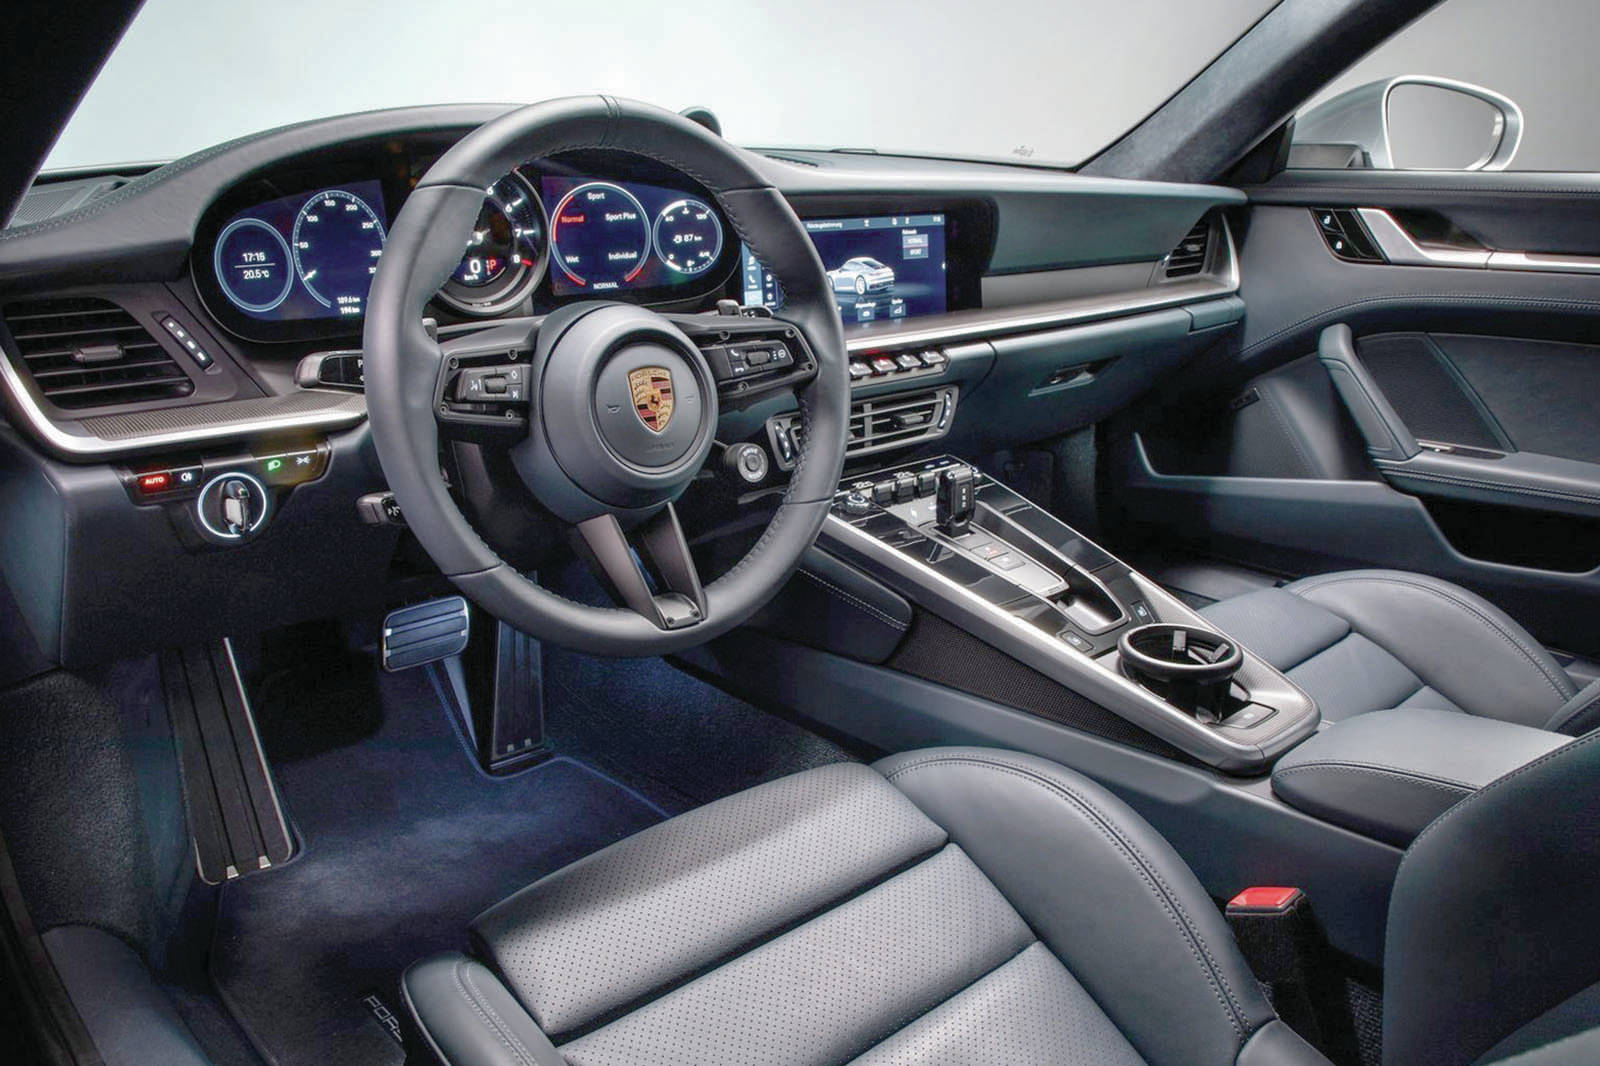 The standard transmission is an eight-speed paddle-shift automatic. A seven-speed manual can be had for no additional discount. With the auto and launch control, Porsche claims a zero-to-100 km/h time of 3.4 seconds. Note the first-ever console cupholder for a 911. Photo: PORSCHE